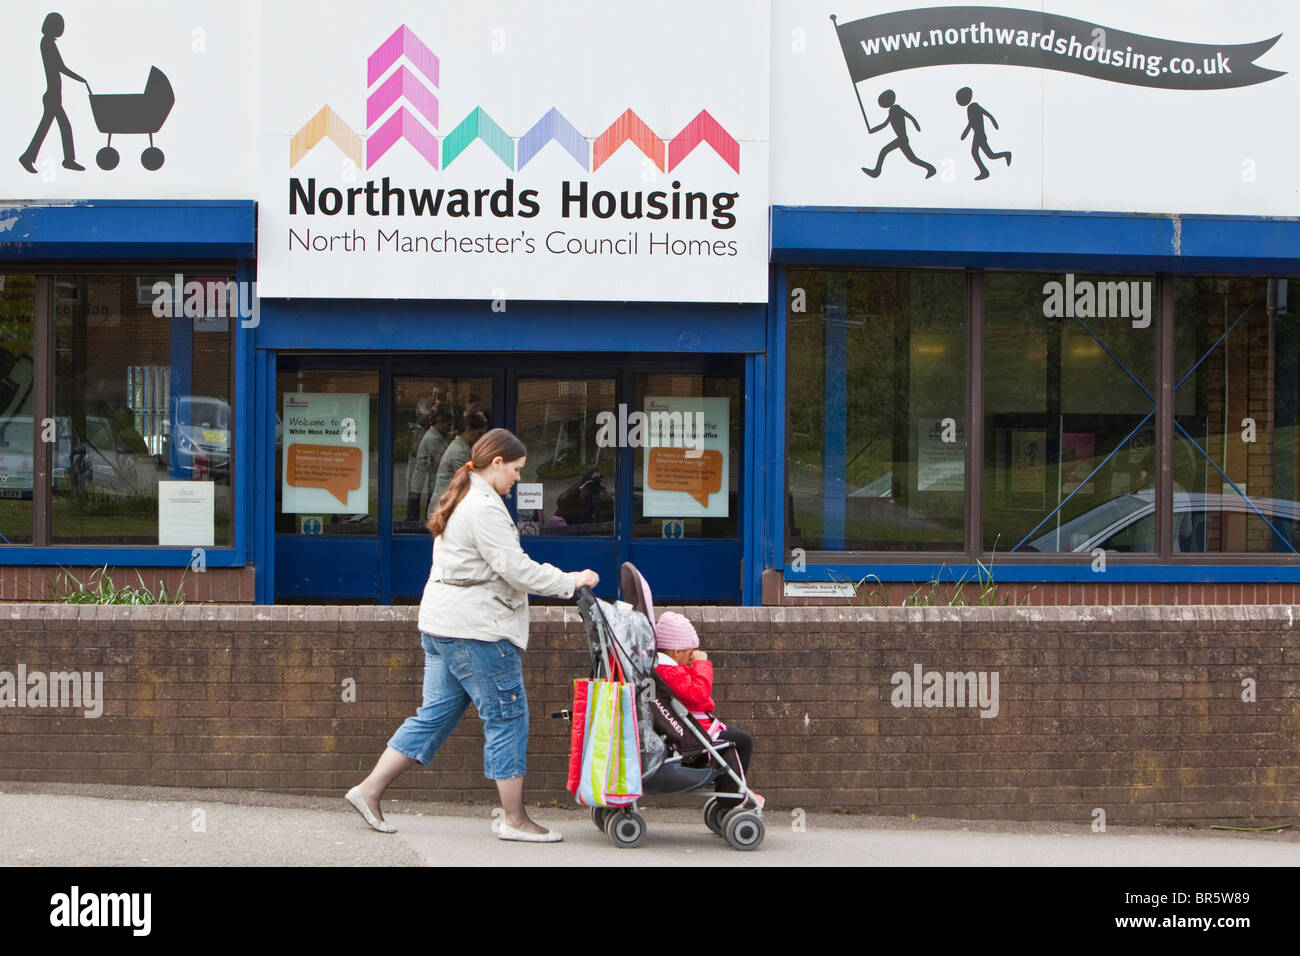 A woman pushing a child in a pram walks past the office door of Northwards housing. Stock Photo